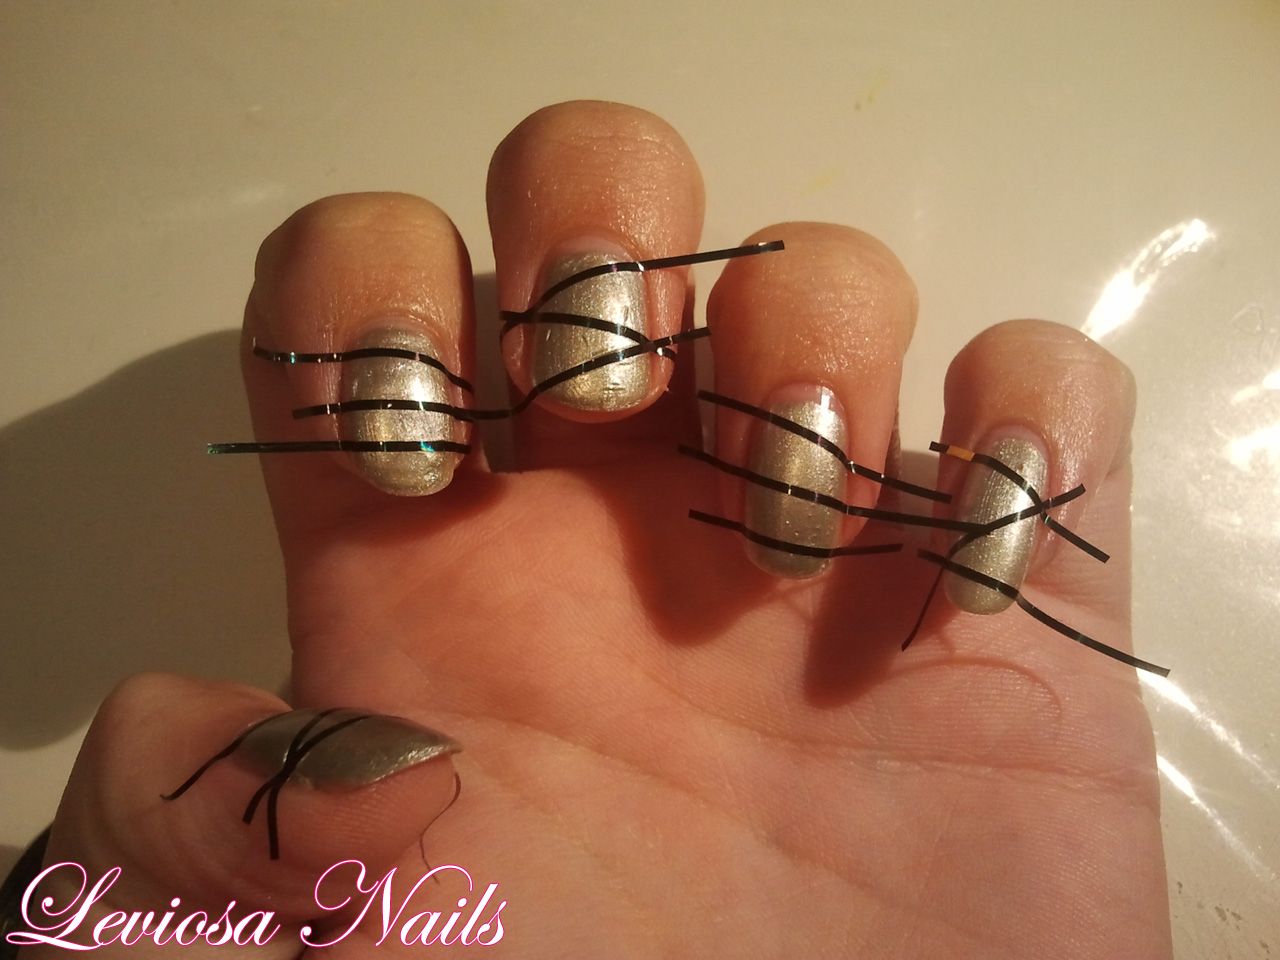 2. 10 Tips for Using Nail Art Striping Tape Like a Pro - wide 1